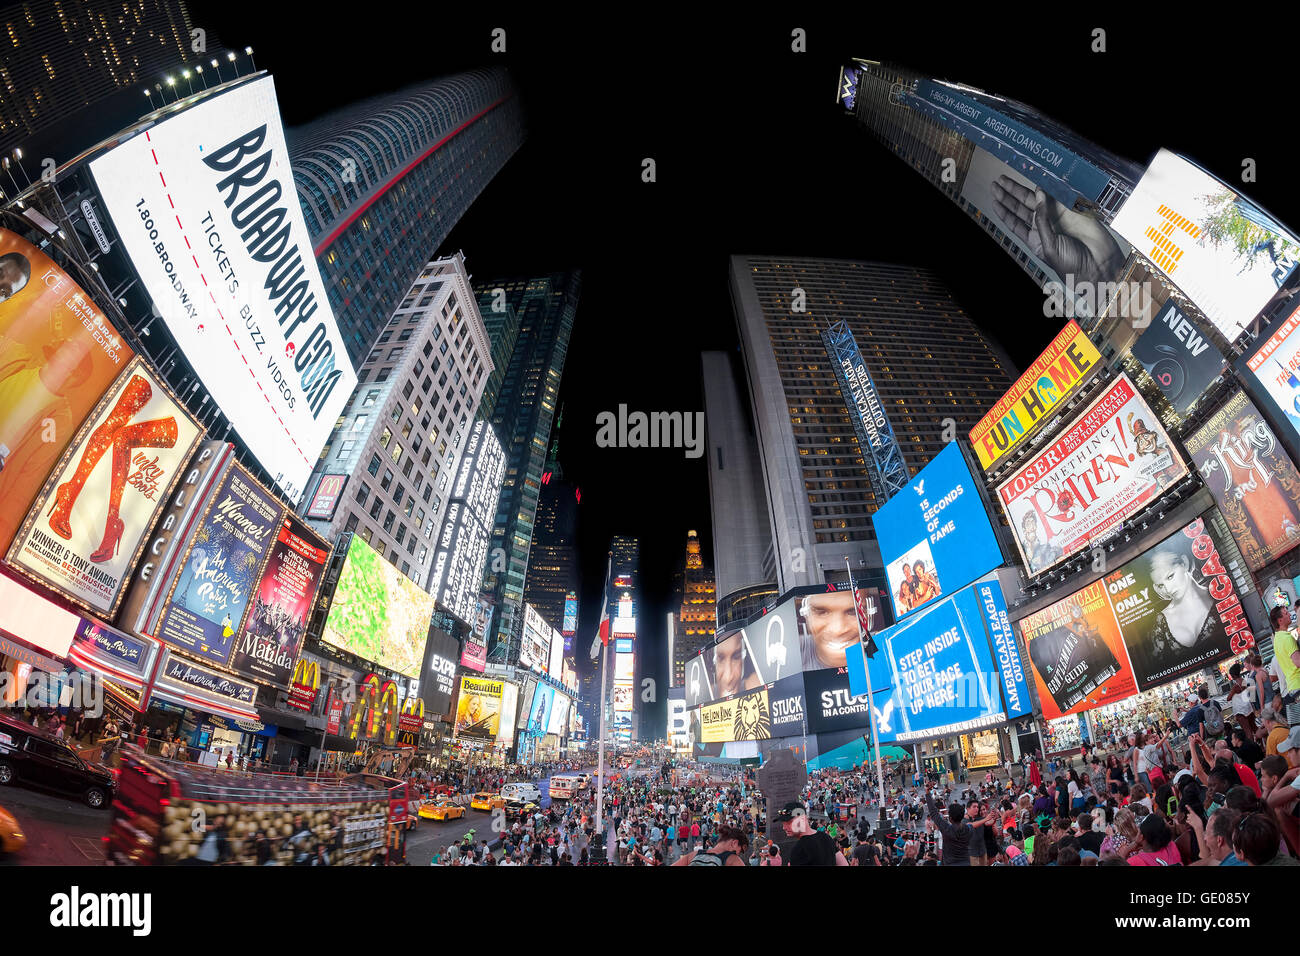 Fisheye lens photo of Times Squares crowded with tourists at night. Stock Photo